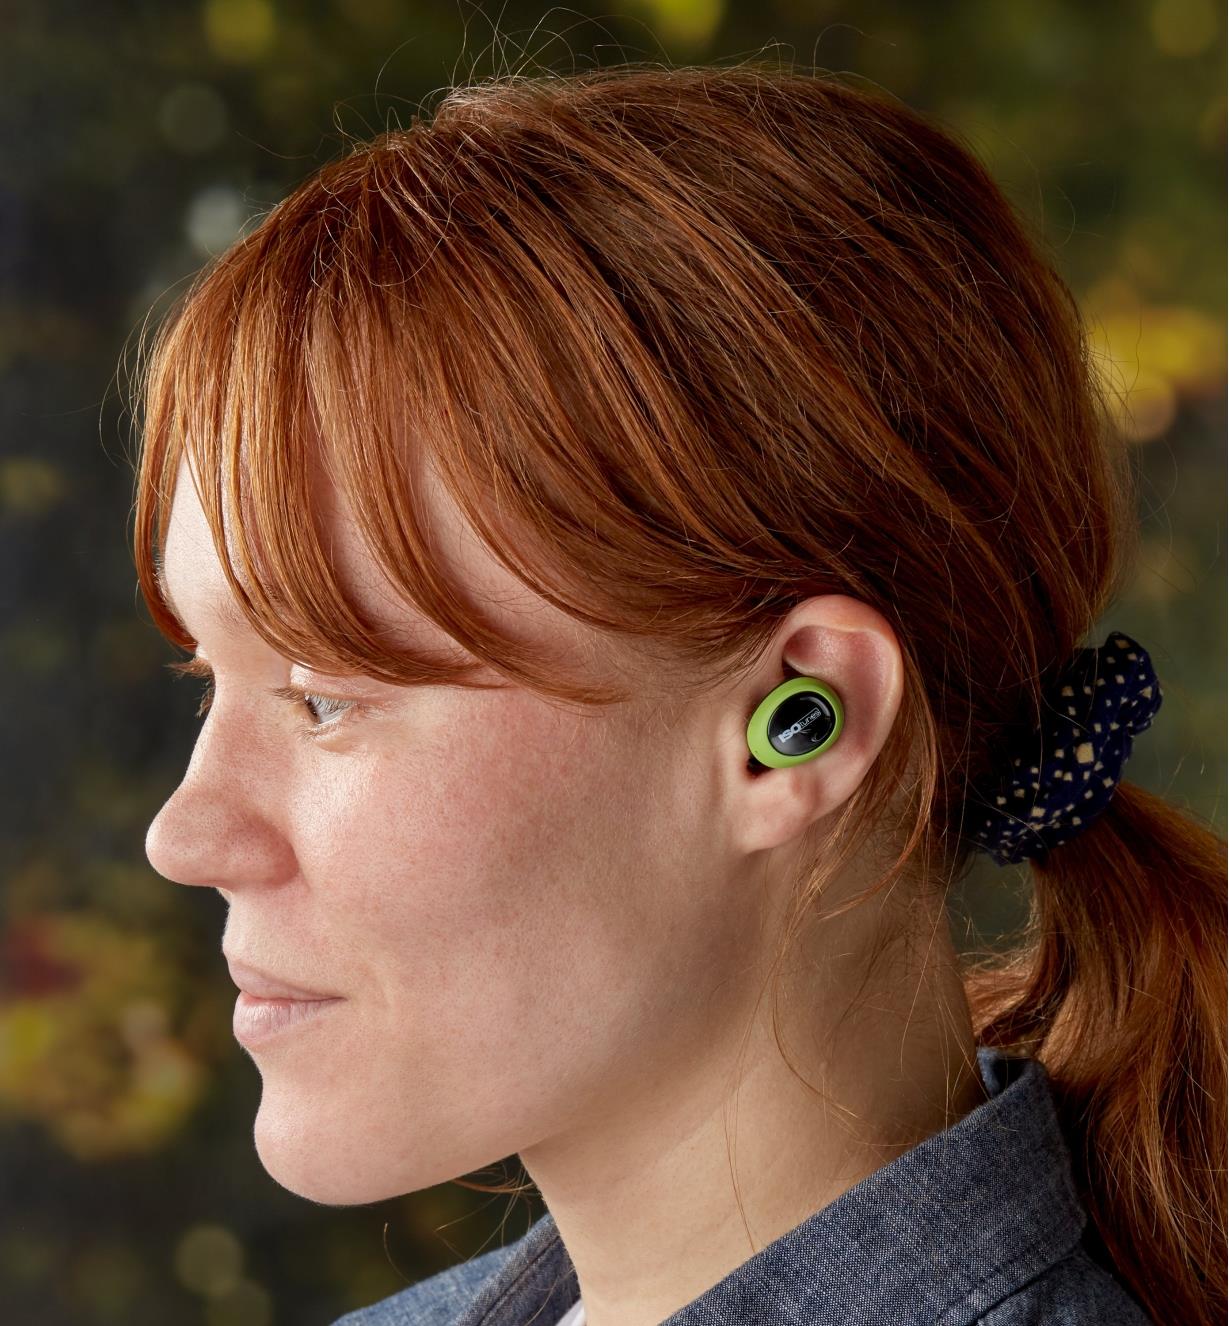 A woman wearing ISOtunes Free wireless electronic hearing protectors